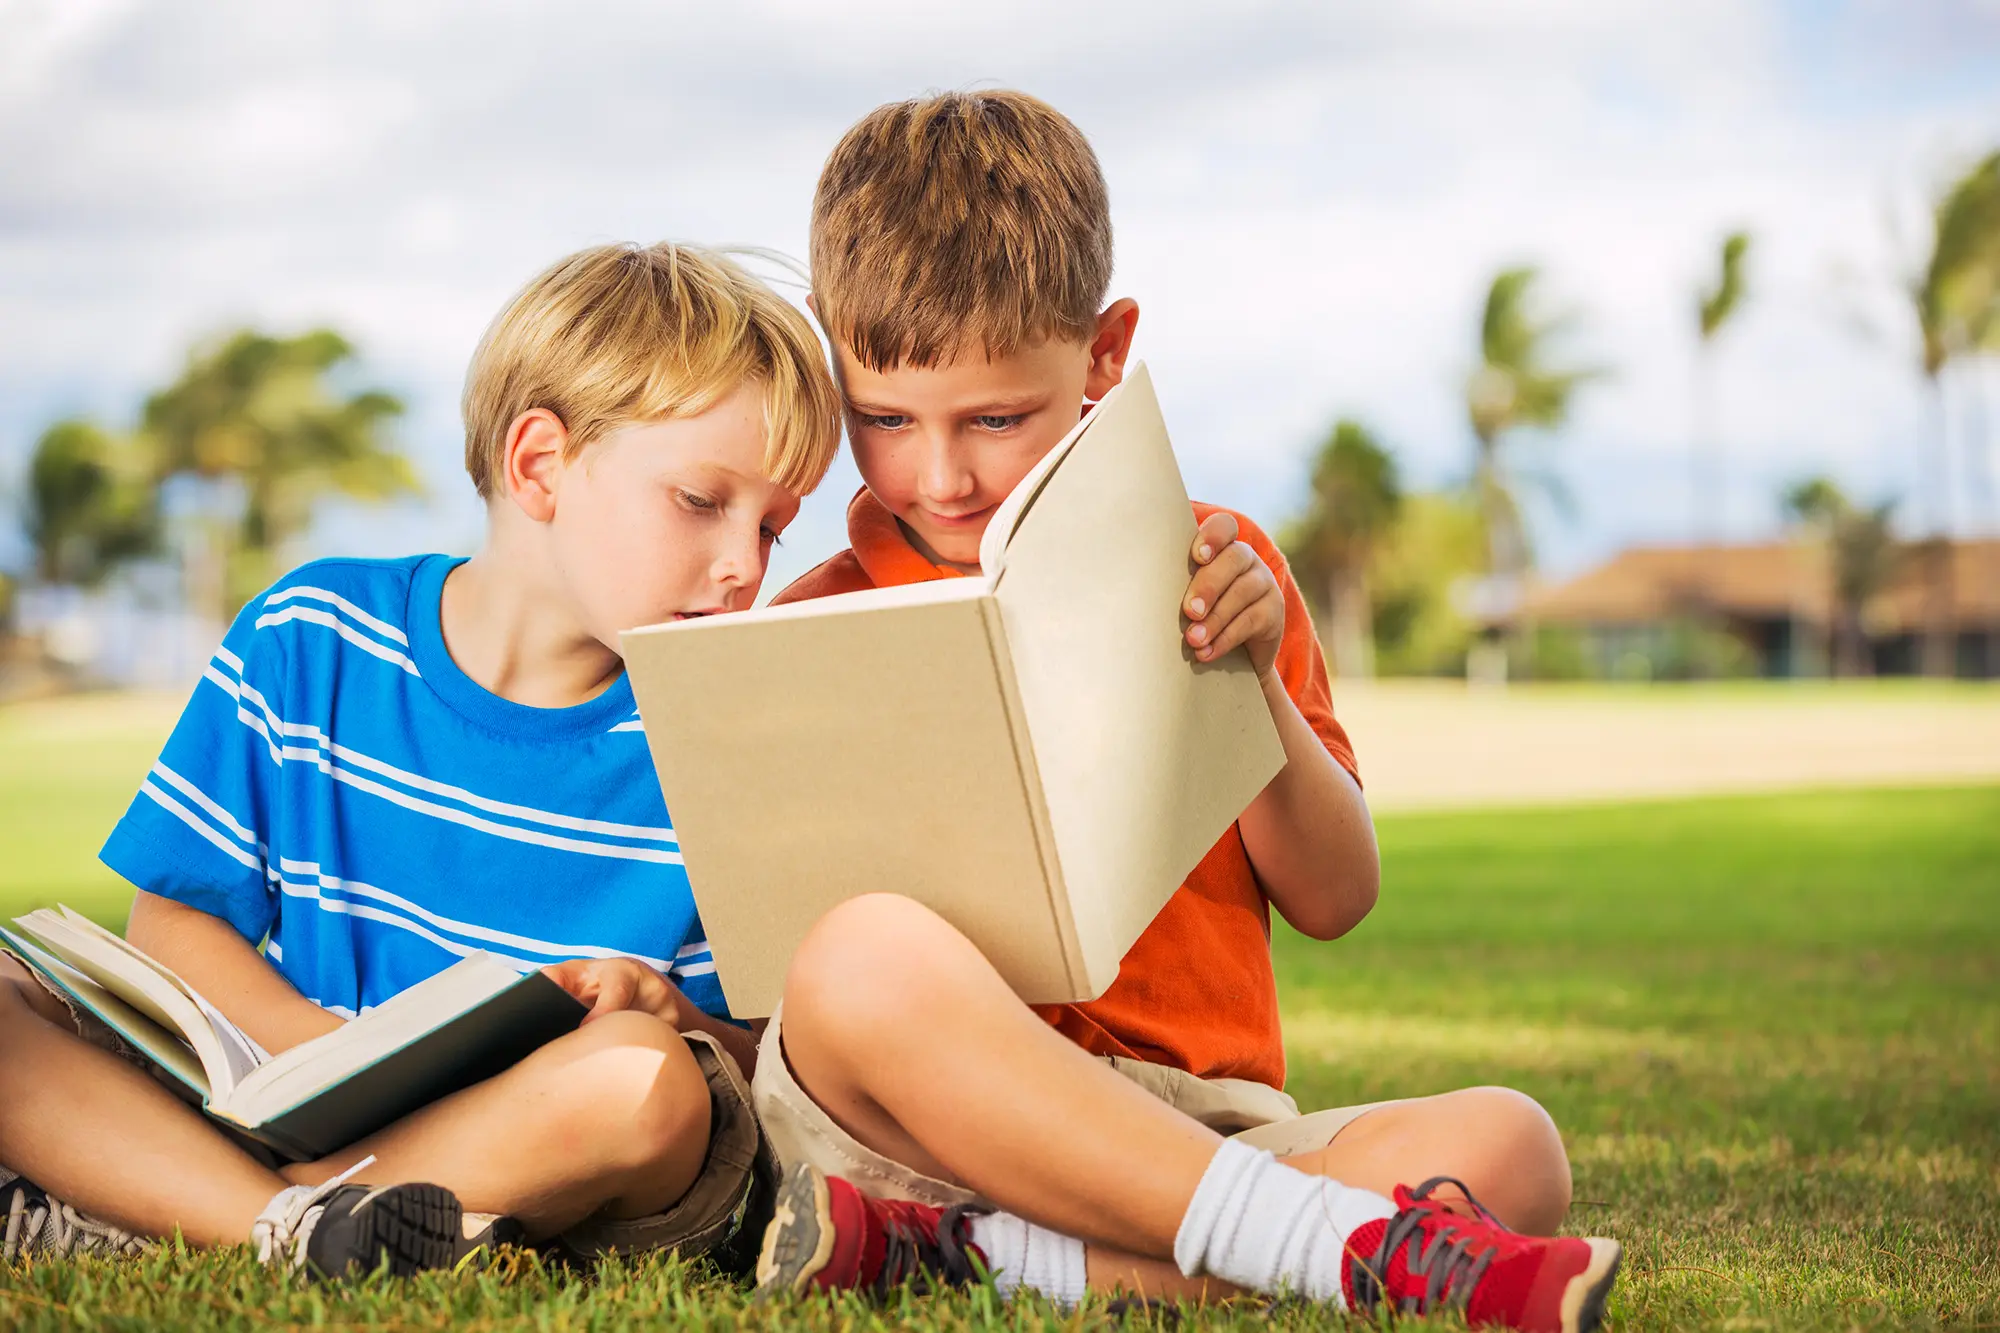 Two young boys reading books on the grass